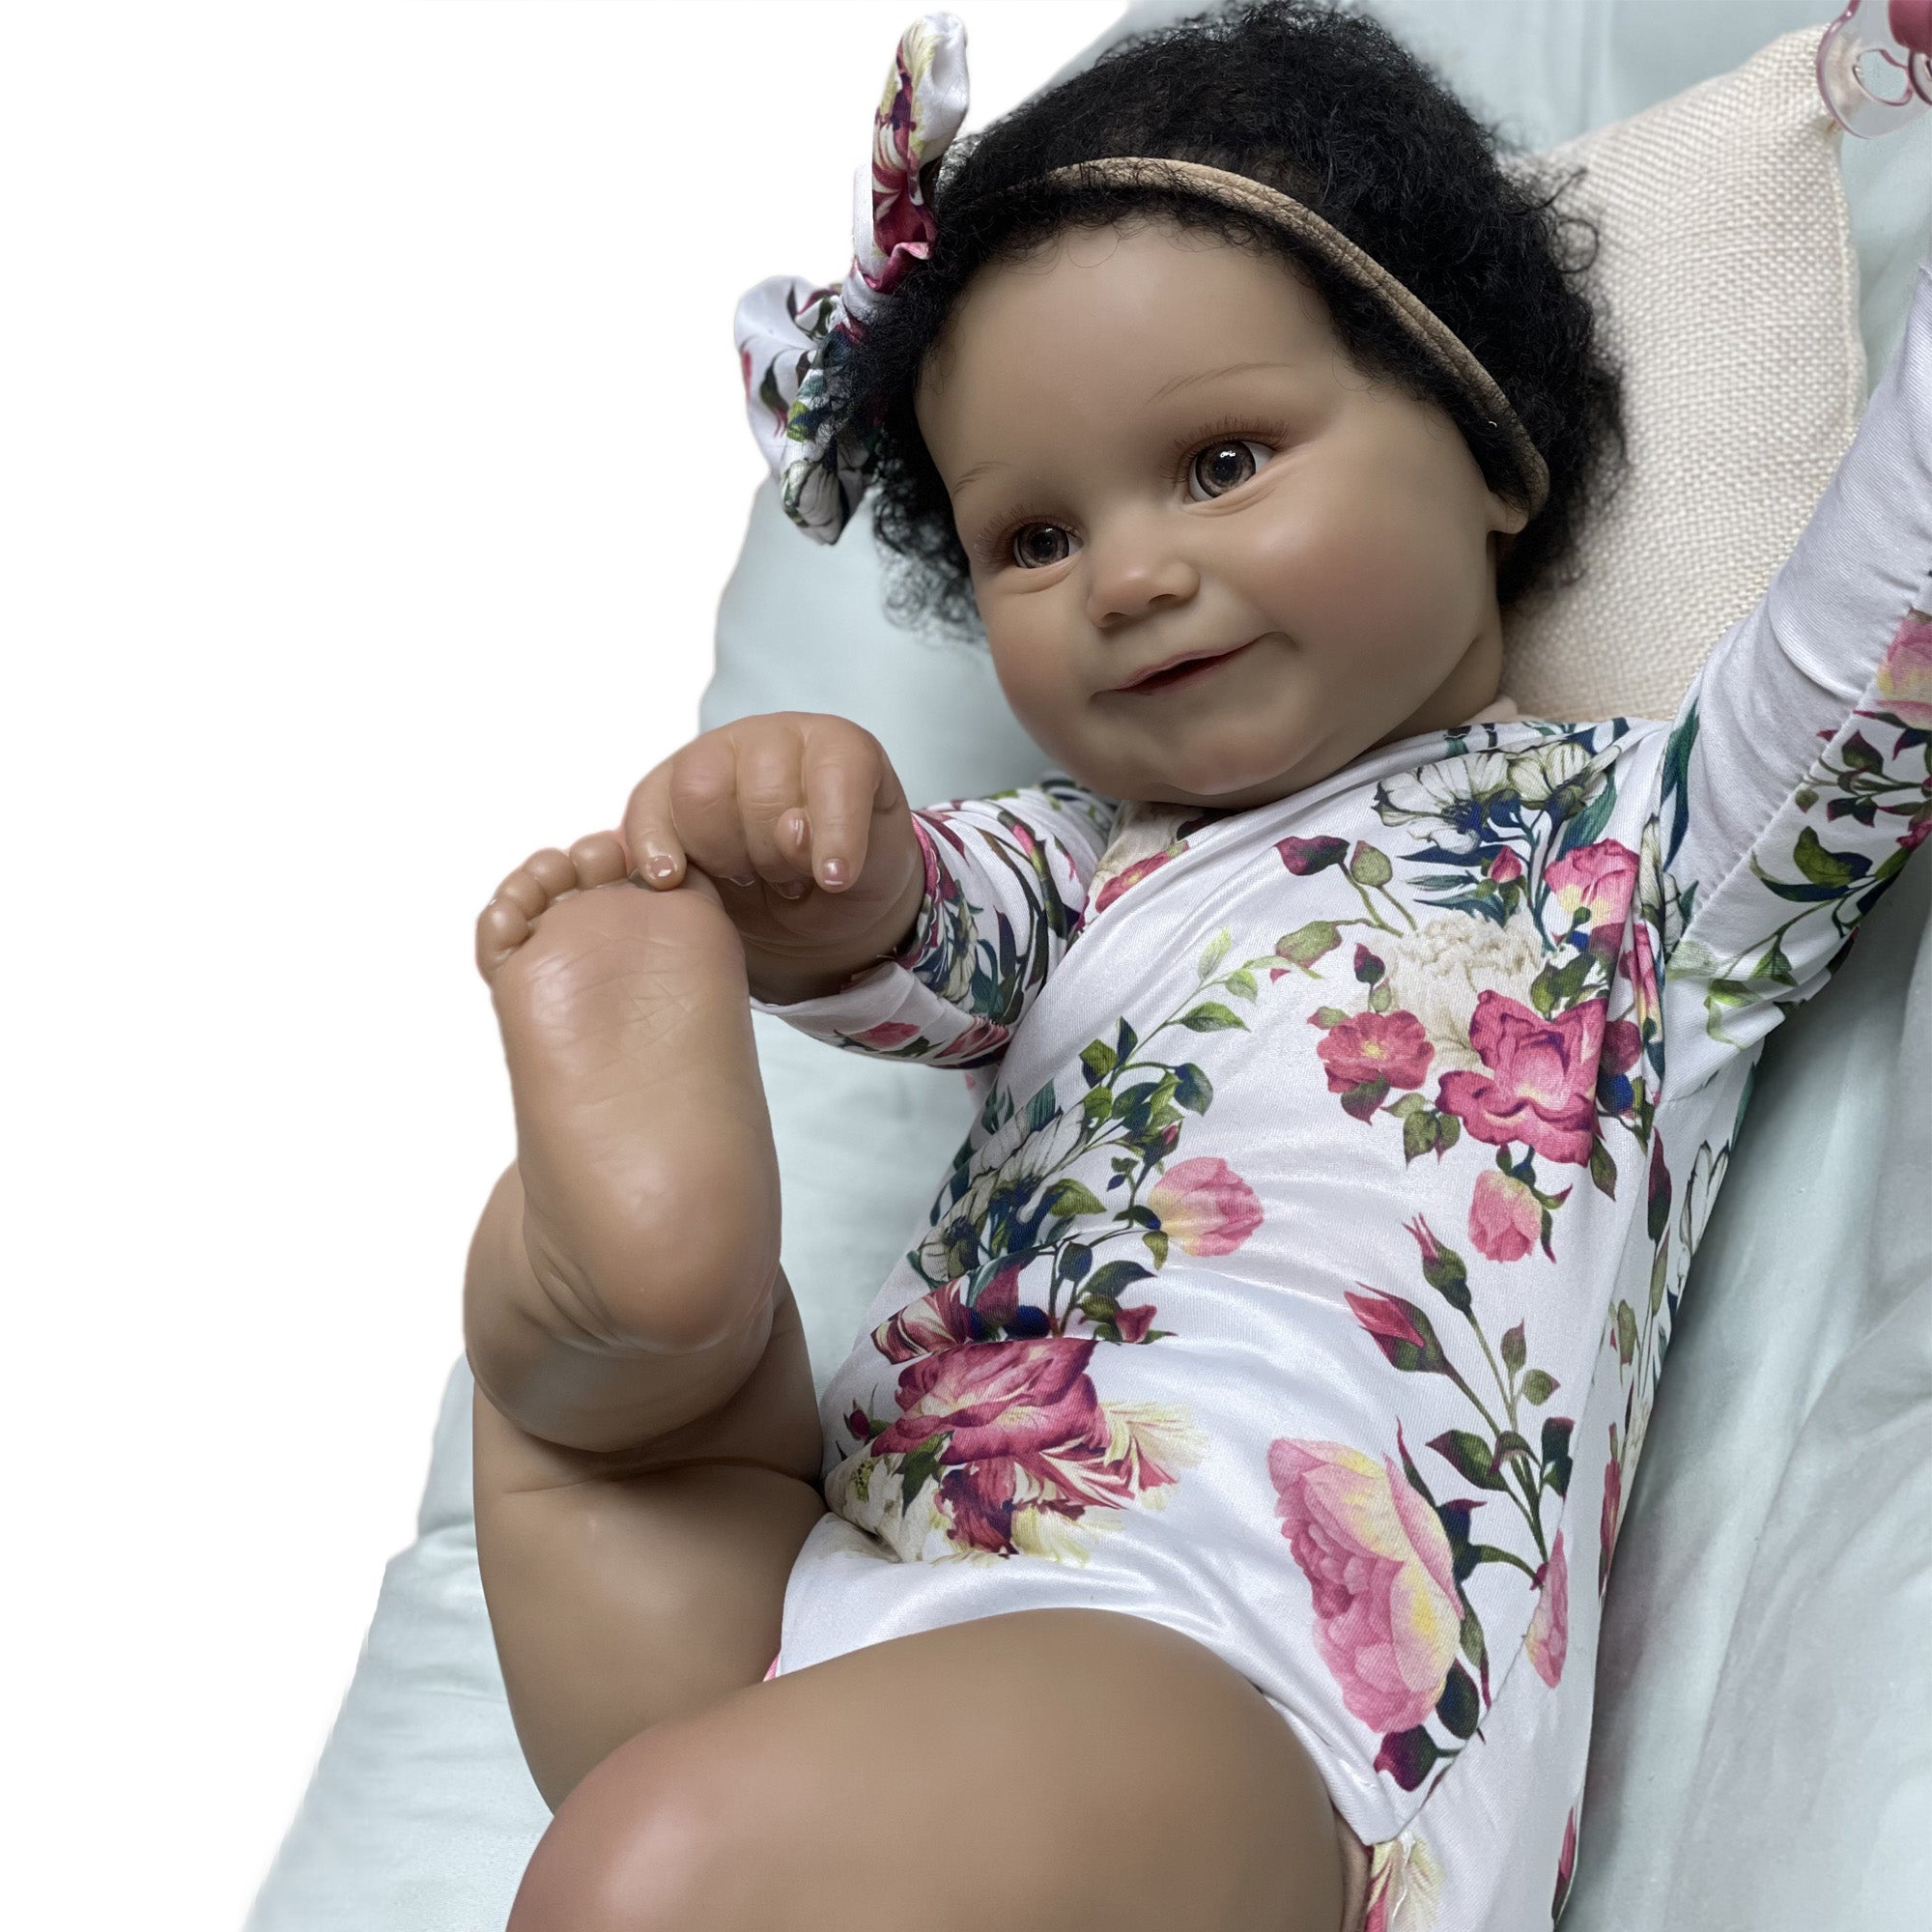 Adolly * Gallery 22 inch African American Reborn Baby Doll Name Amelia